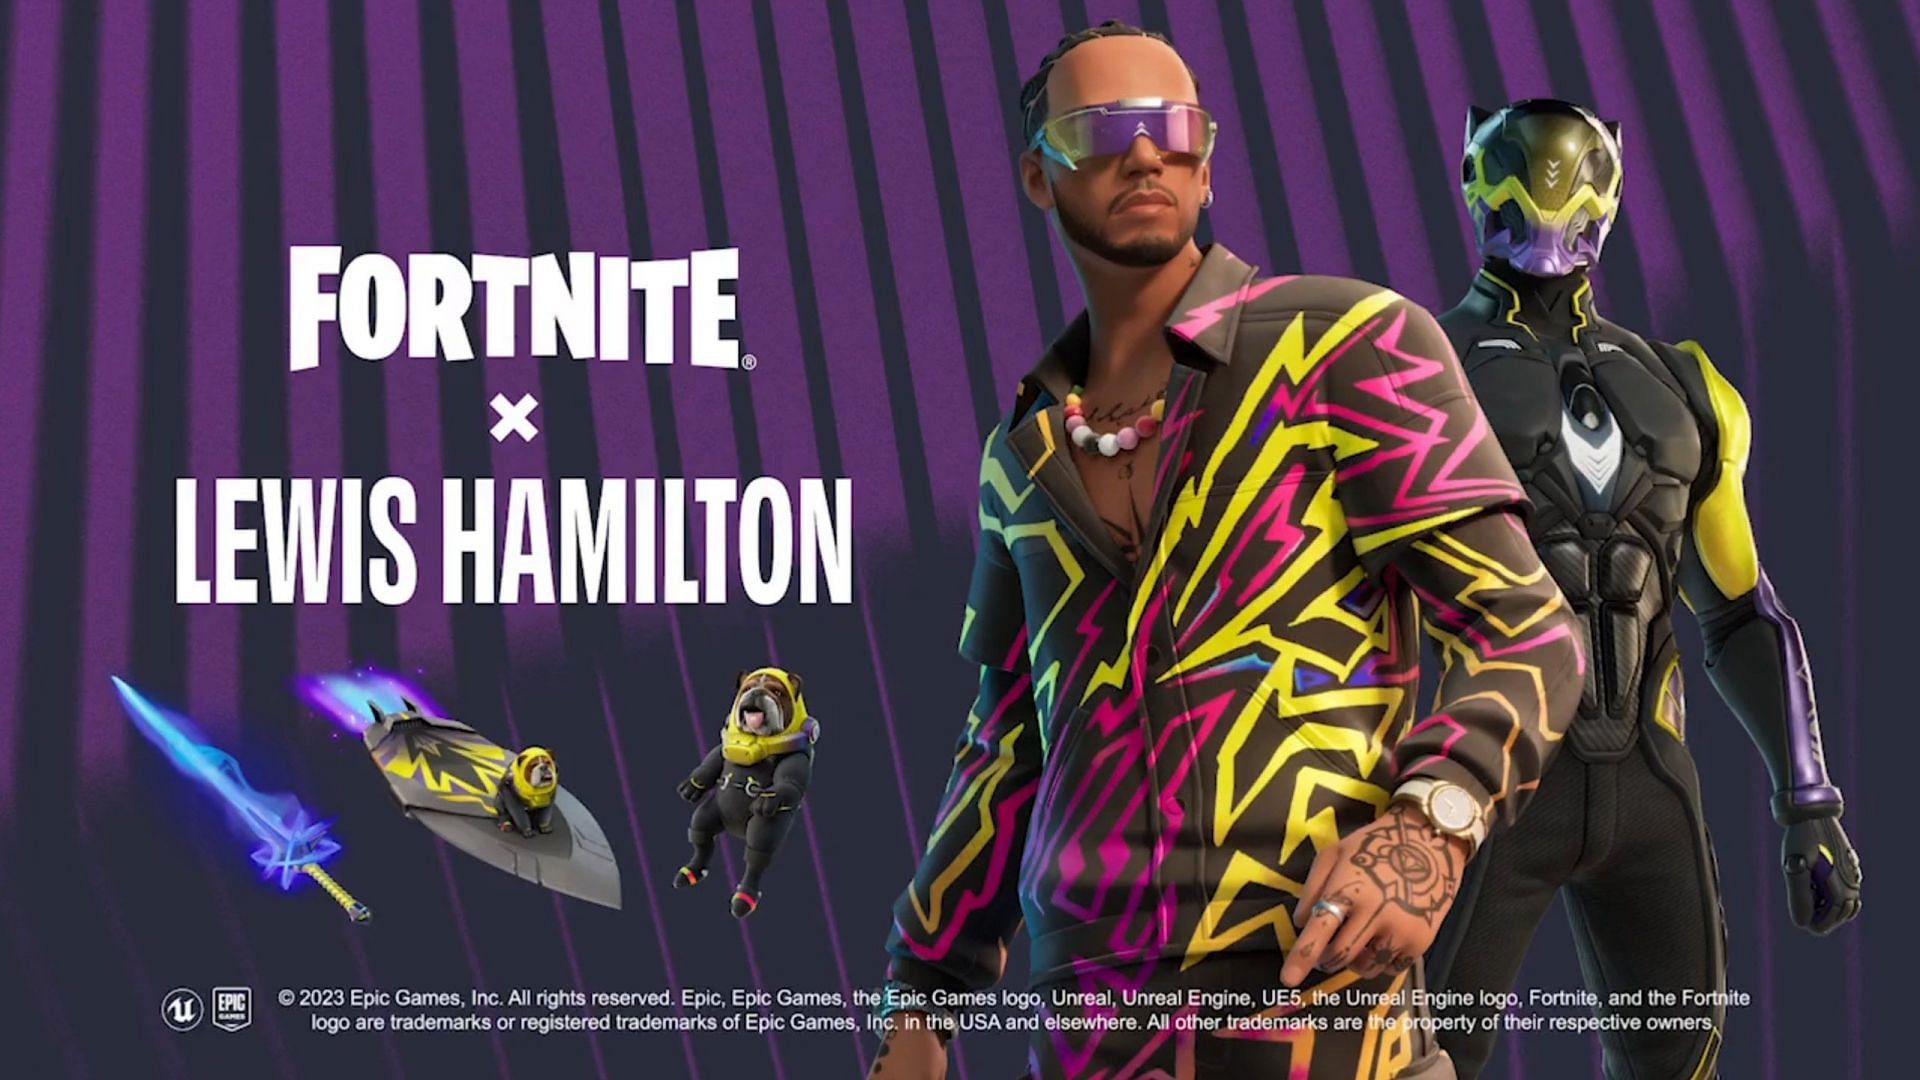 Fortnite x Lewis Hamilton collaboration: Outfits, challenges, and more